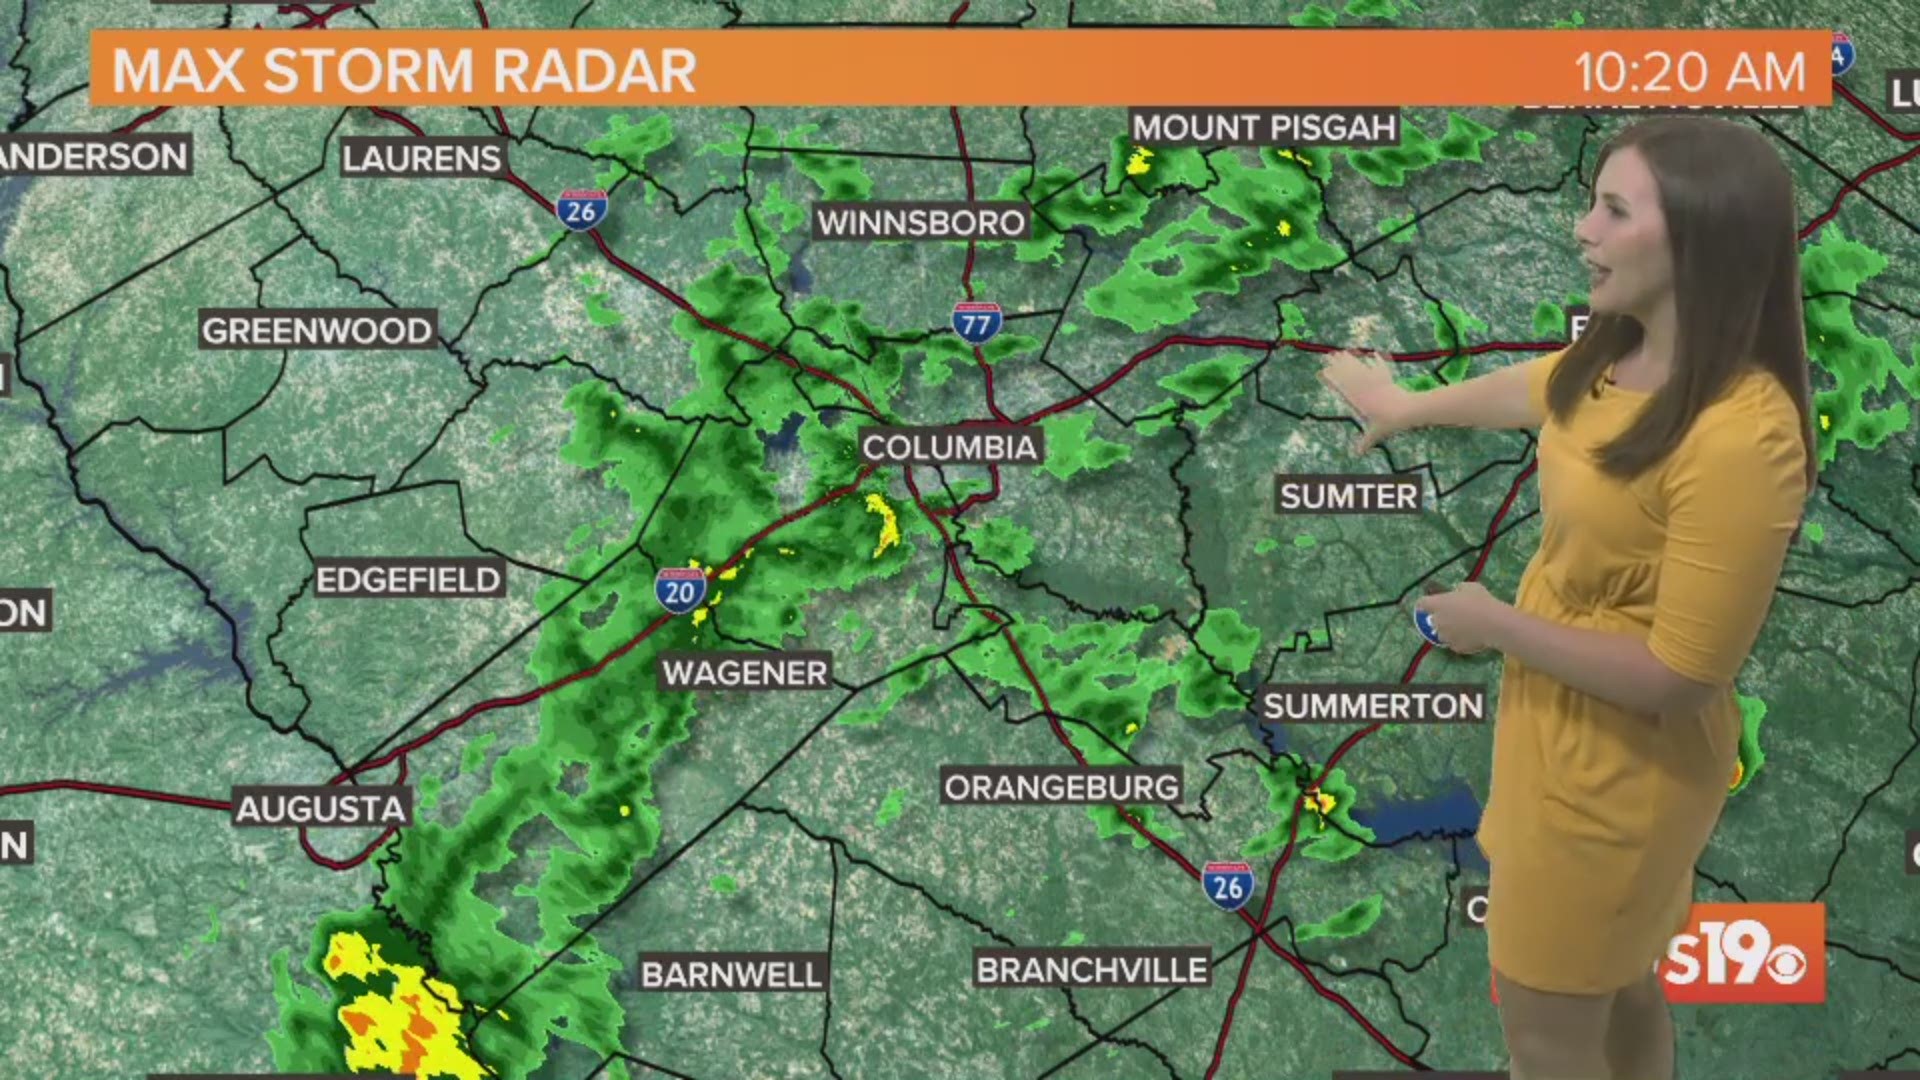 Showers across the Midlands today and into tonight before we dry out and slowly warm up on Sunday.